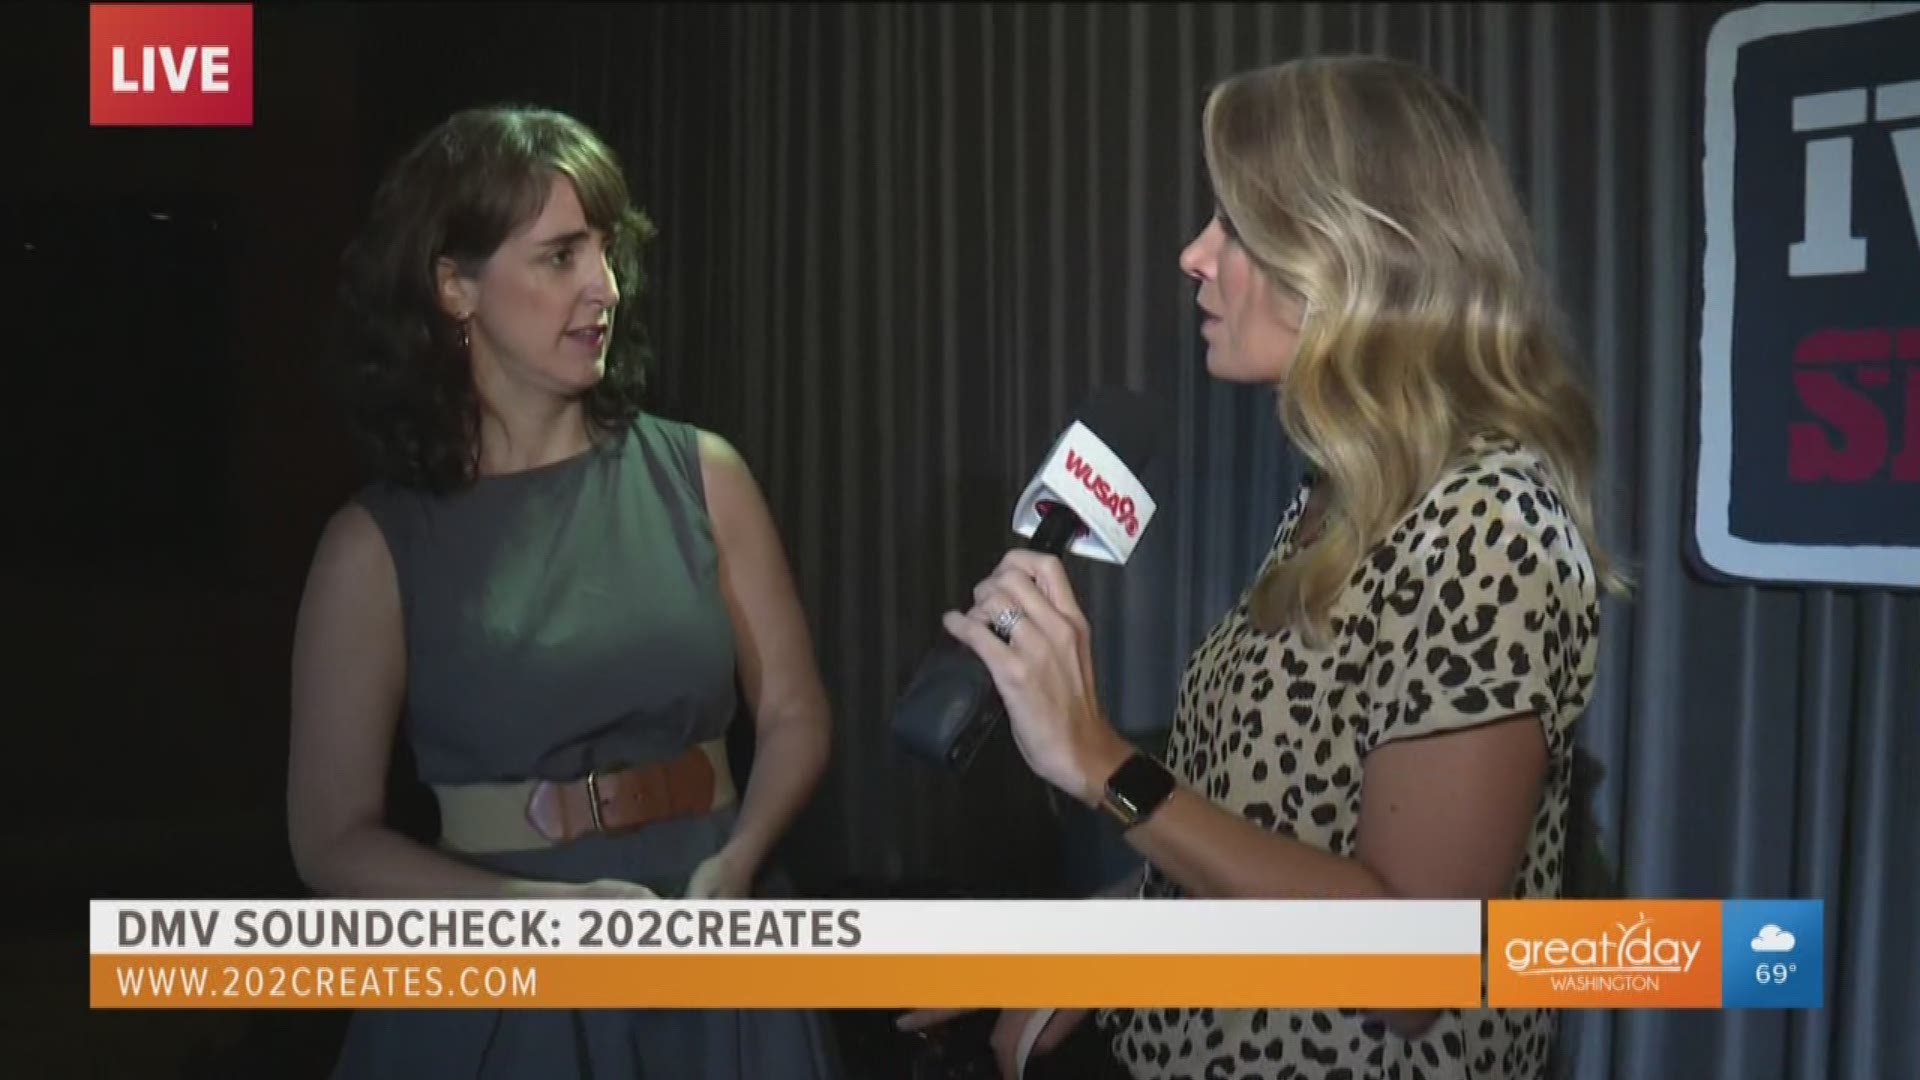 Culinary arts, fashion arts, music, film and so much more are showcased as part of 202Creates.  Check out the amazing events at 202creates.com.  This segment is sponsored by the DC Office of Cable Television, Film, Music, and Entertainment.